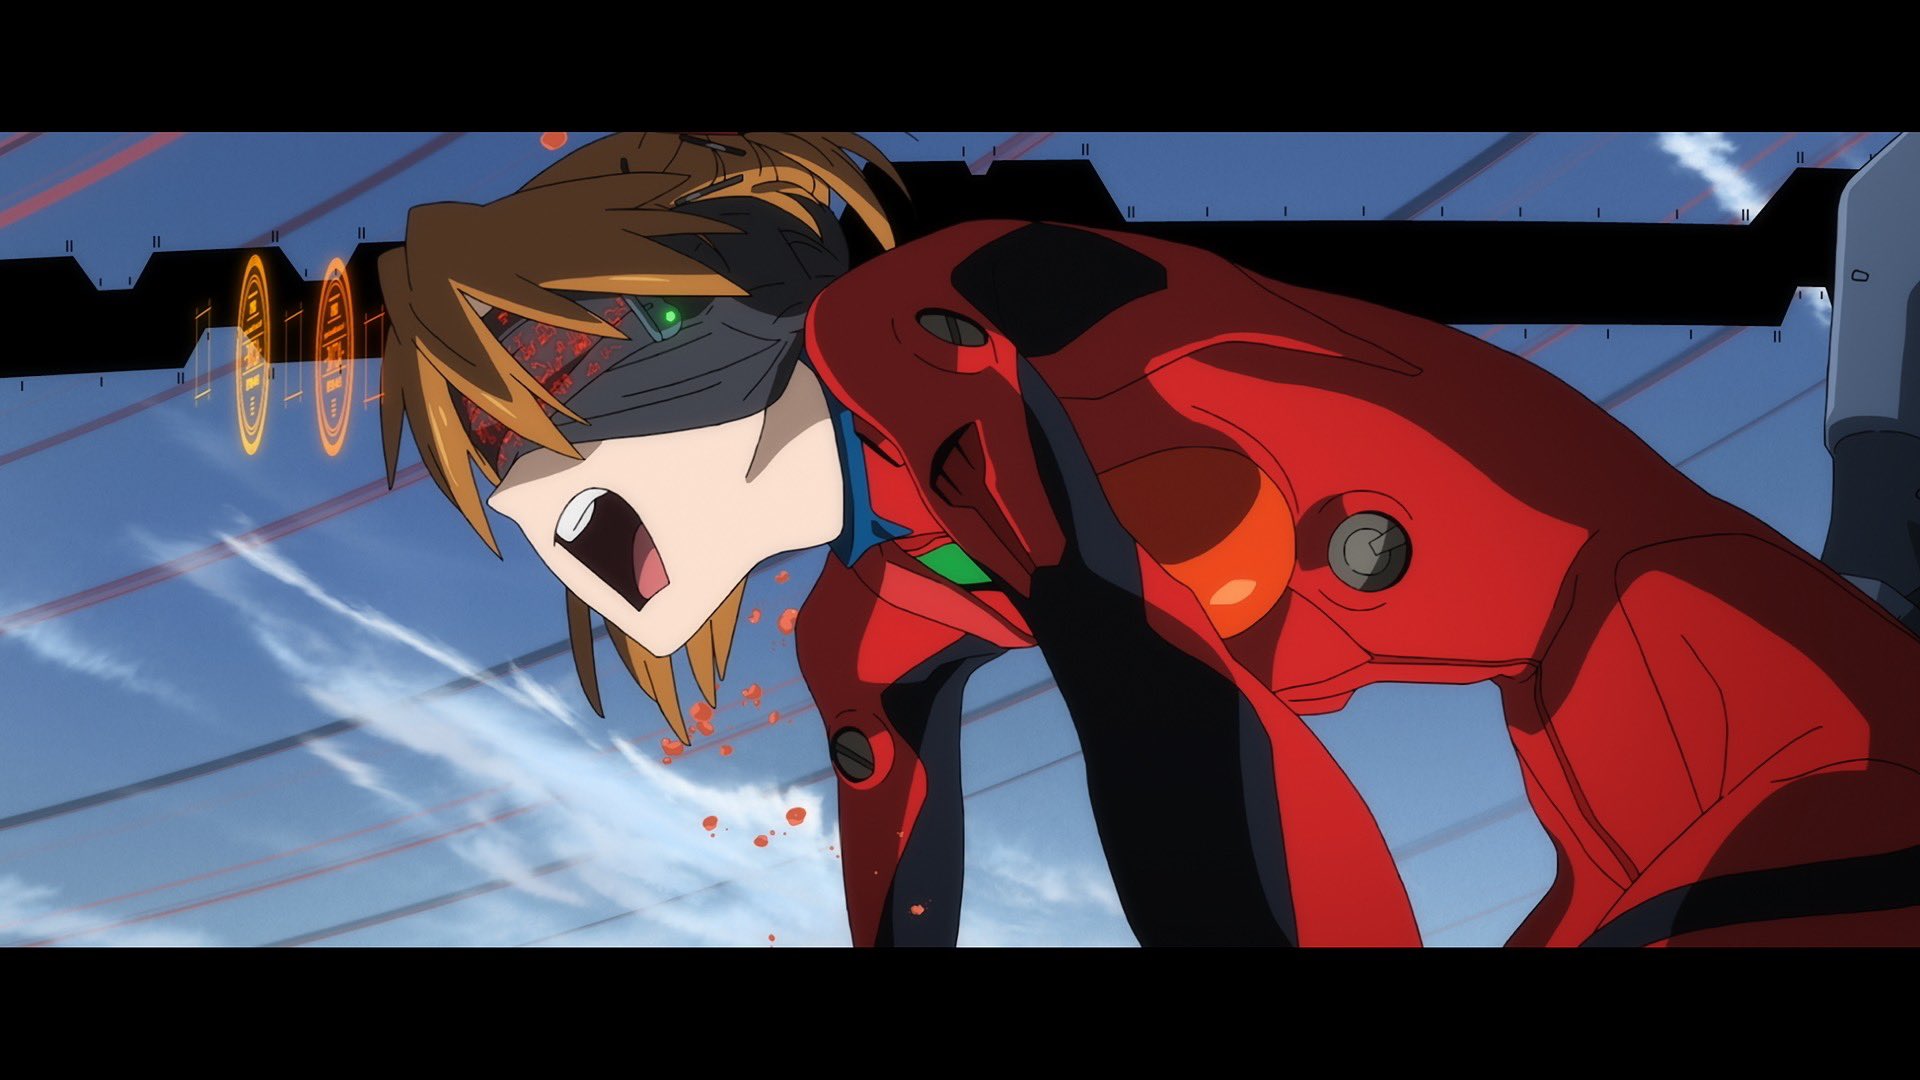 Evangelion: 3.0 You Can (Not) Redo, Evangelion: 3.0+1.0 Thrice Upon a Time